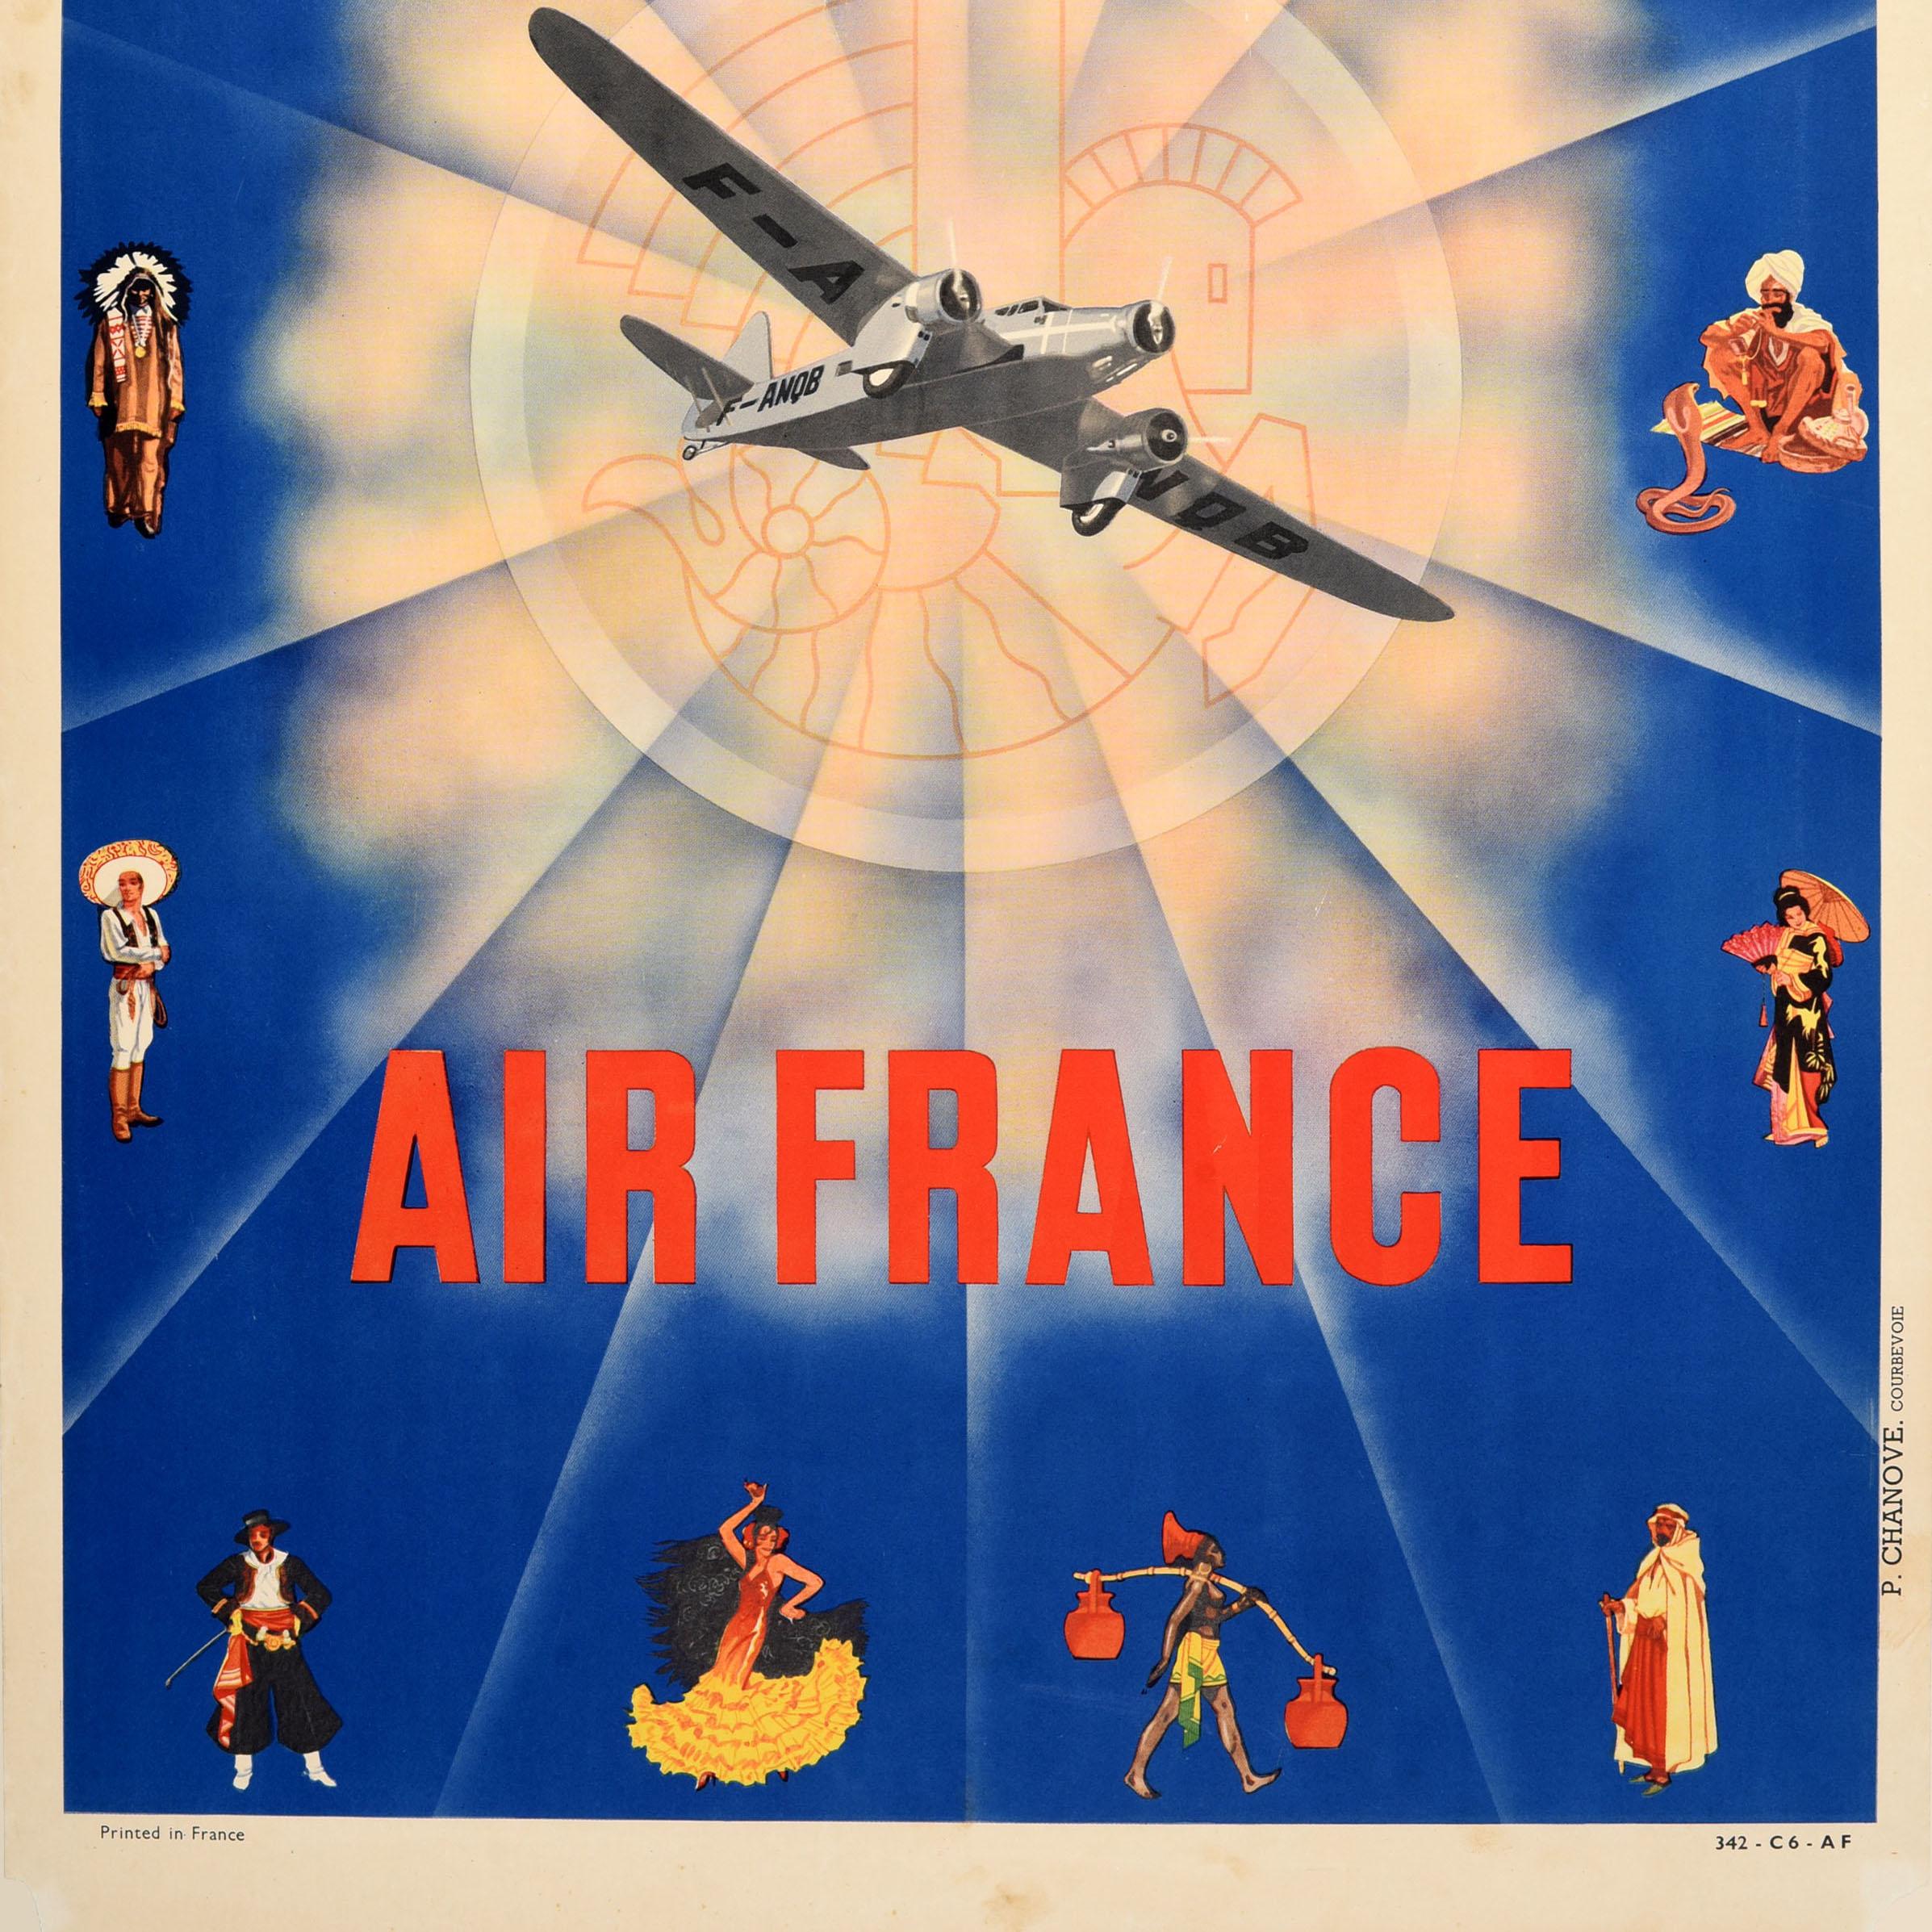 Original vintage travel advertising poster for Air France featuring a stunning Art Deco design with illustrations of people dressed in traditional costumes and national clothing from around the world - including a Spanish flamenco dancer, a Scottish